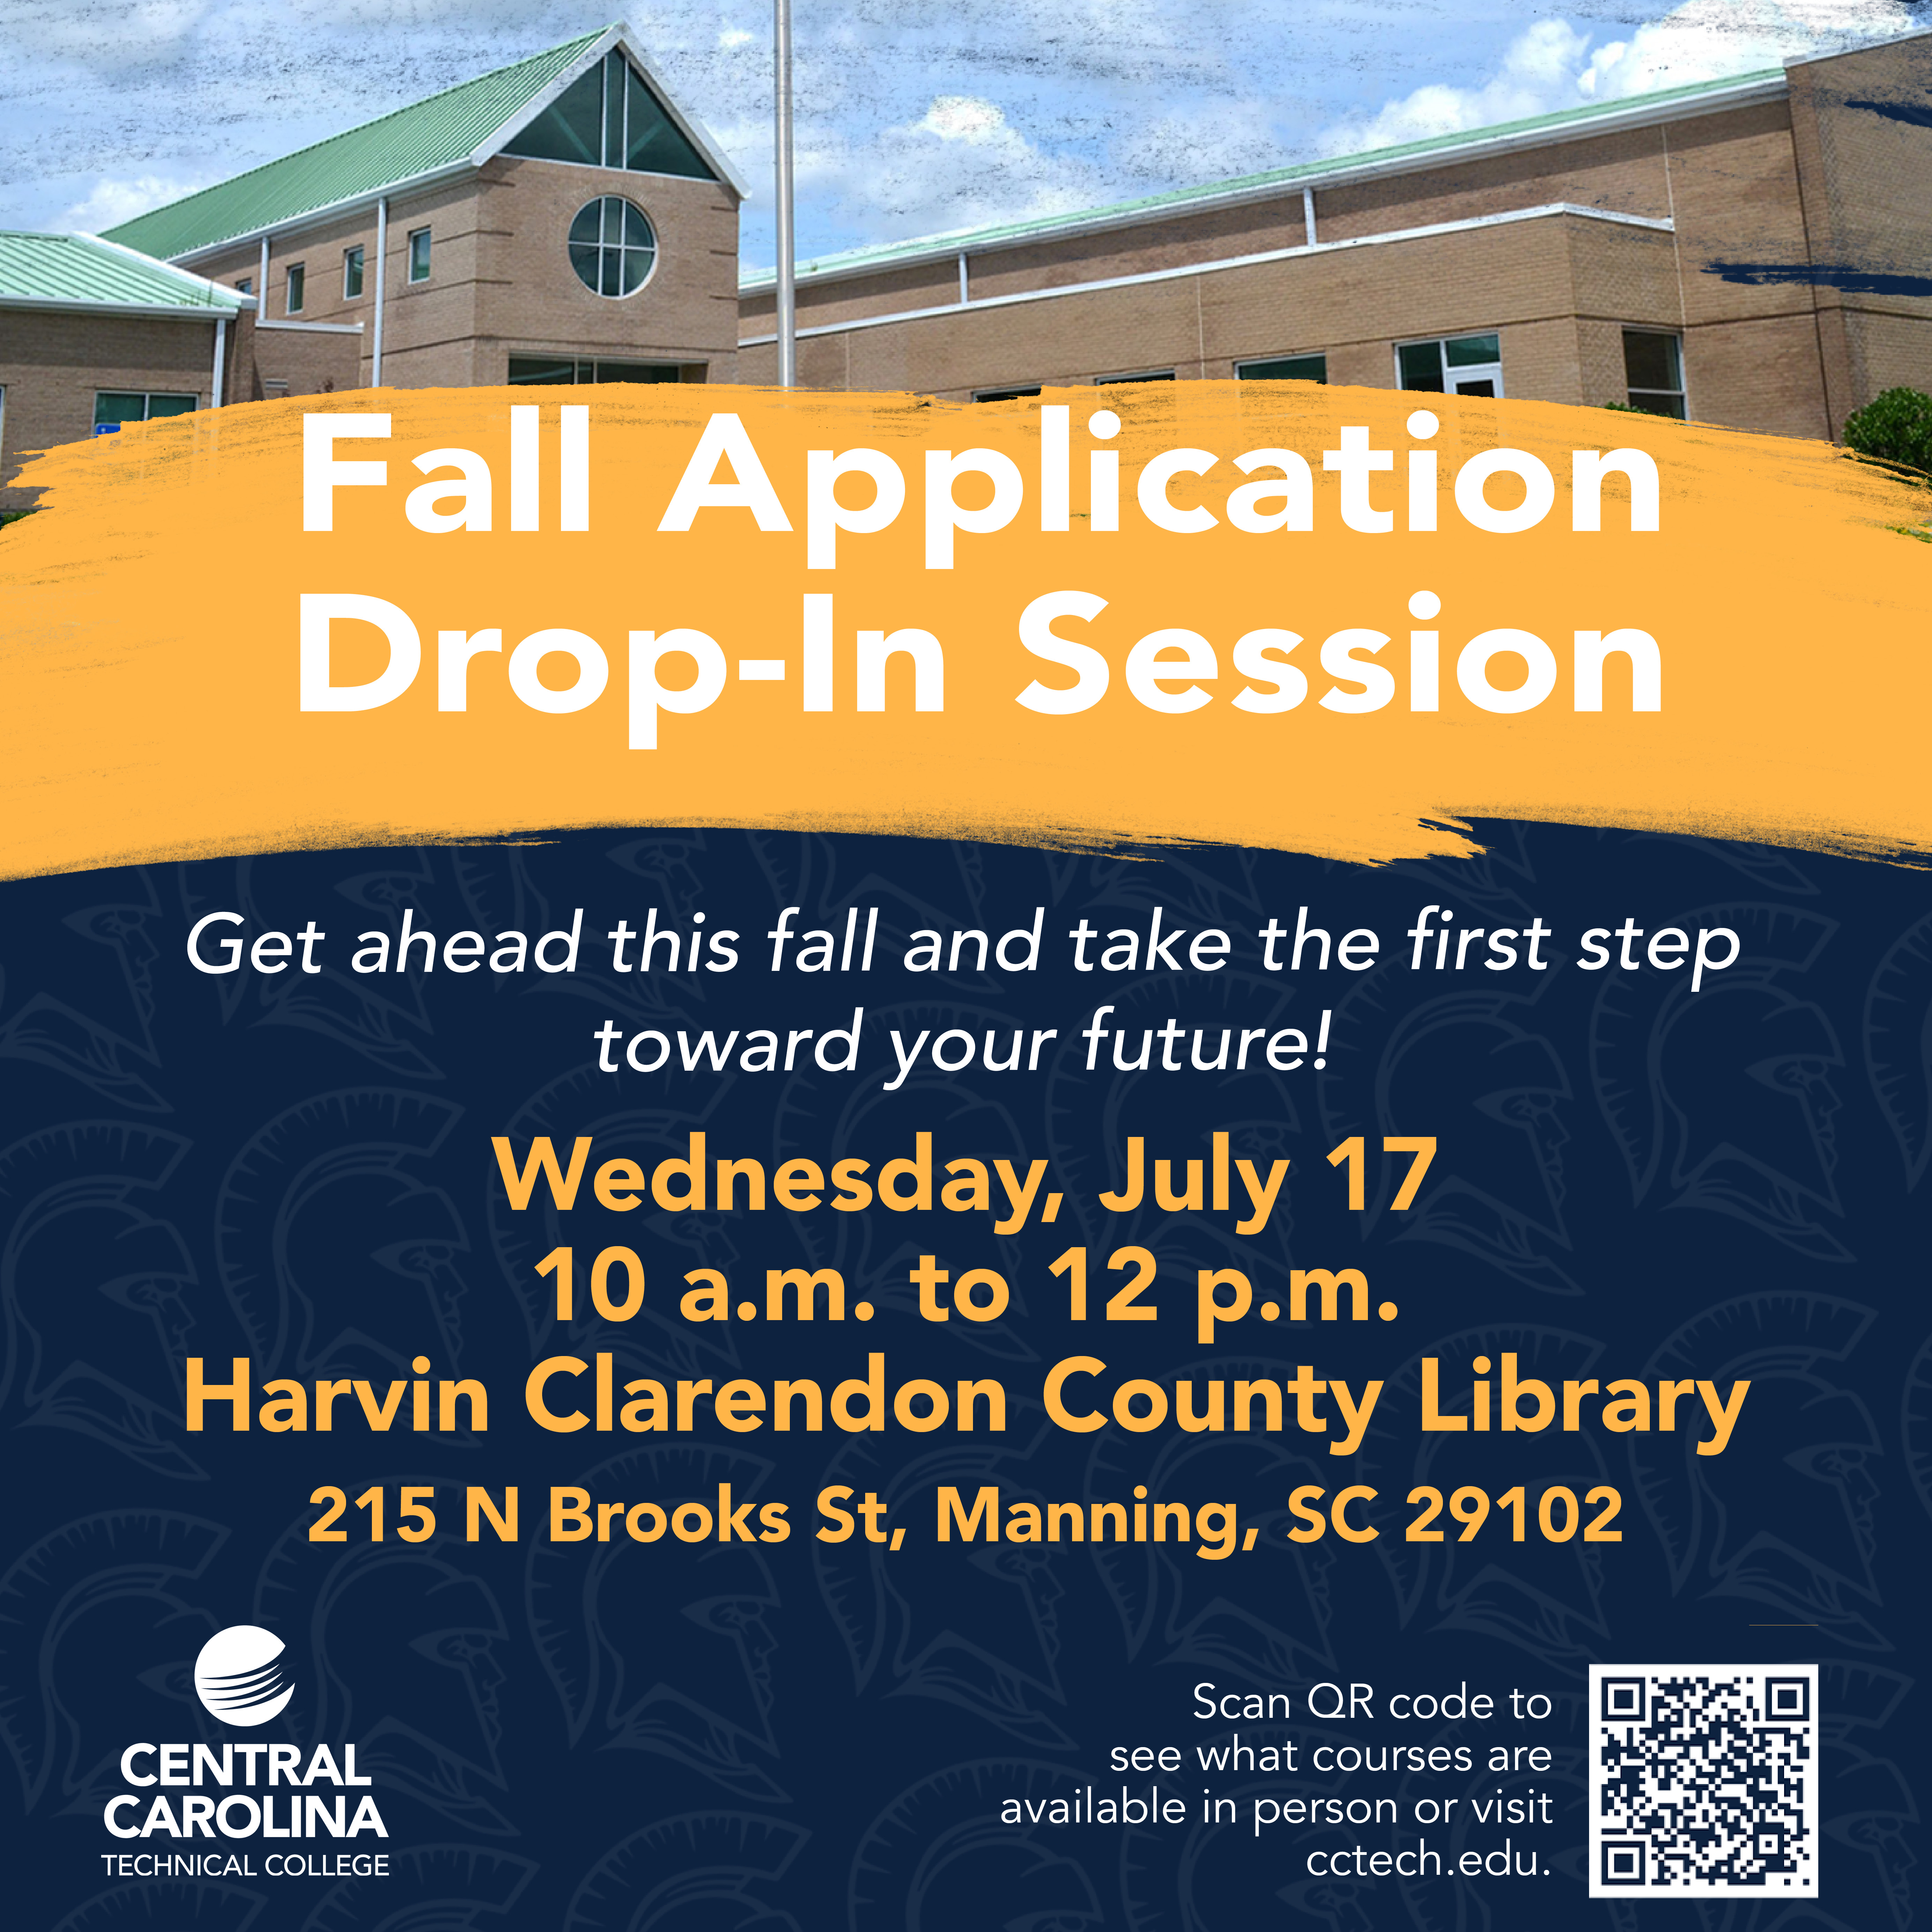 Fall Application Drop-In Session on July 17 from 10 am to 12 pm at the Harvin Clarendon County Library.